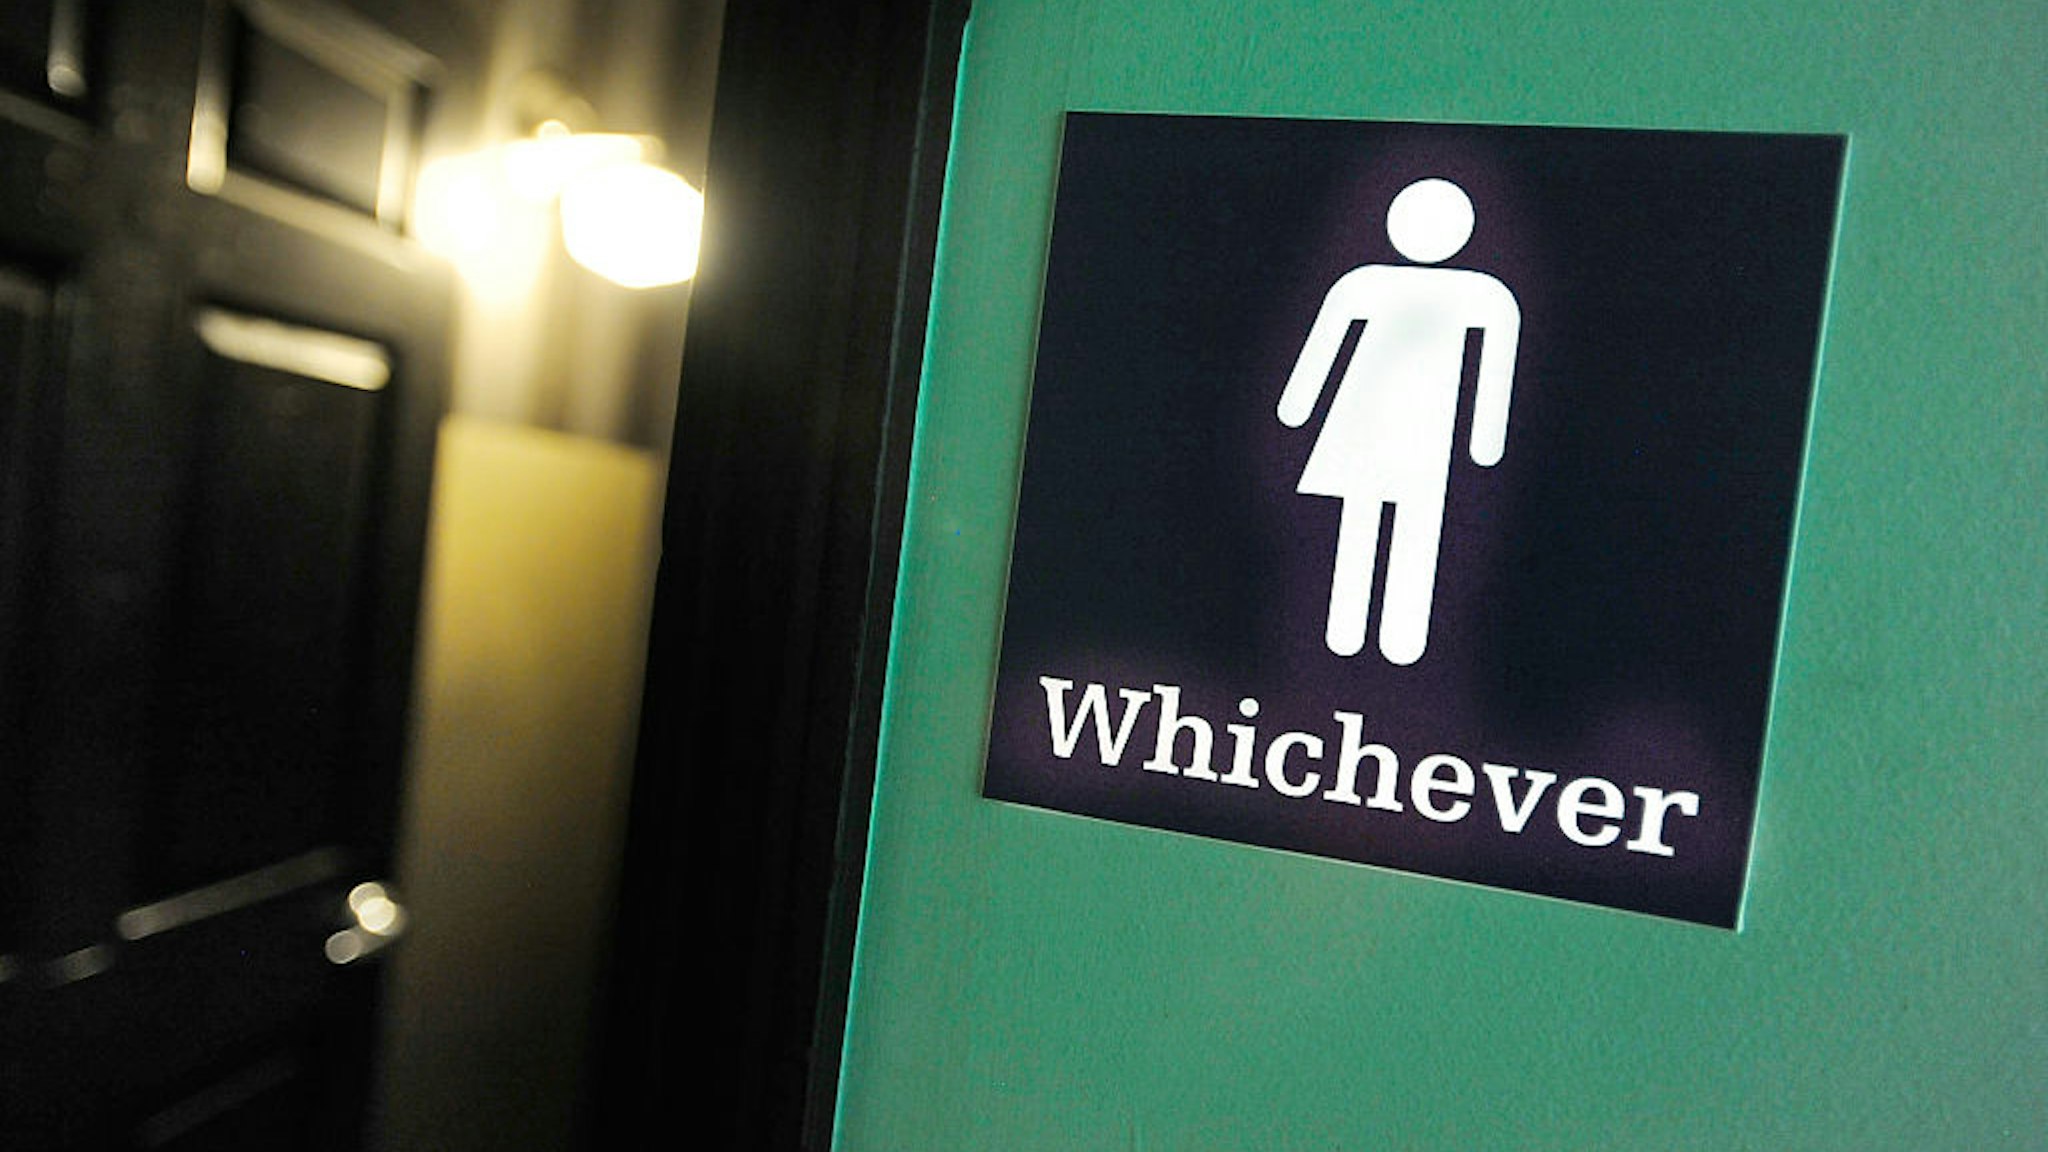 DURHAM, NC - MAY 11: A gender neutral sign is posted outside a bathrooms at Oval Park Grill on May 11, 2016 in Durham, North Carolina. Debate over transgender bathroom access spreads nationwide as the U.S. Department of Justice countersues North Carolina Governor Pat McCrory from enforcing the provisions of House Bill 2 (HB2) that dictate what bathrooms transgender individuals can use. (Photo by Sara D. Davis/Getty Images)